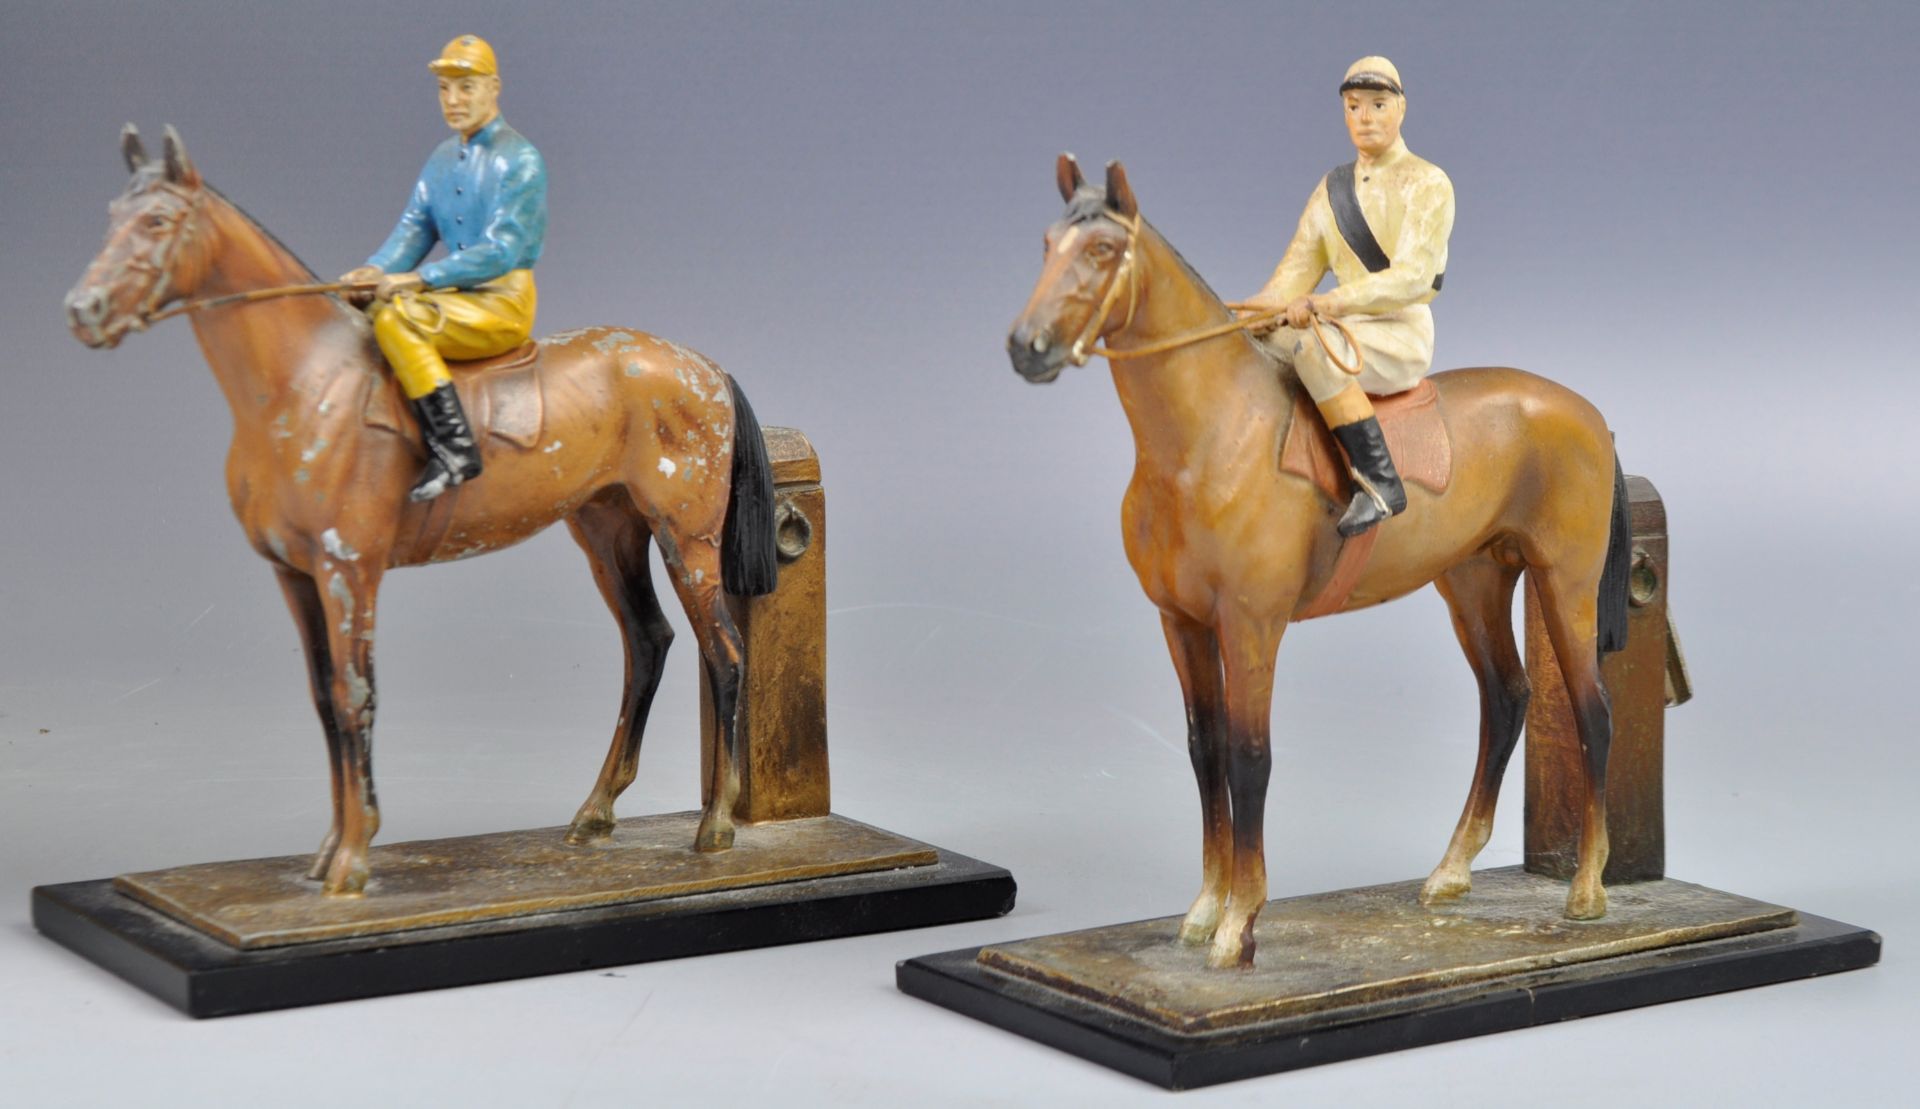 PAIR OF COLD PAINTED RACE HORSE TABLE LIGHTERS